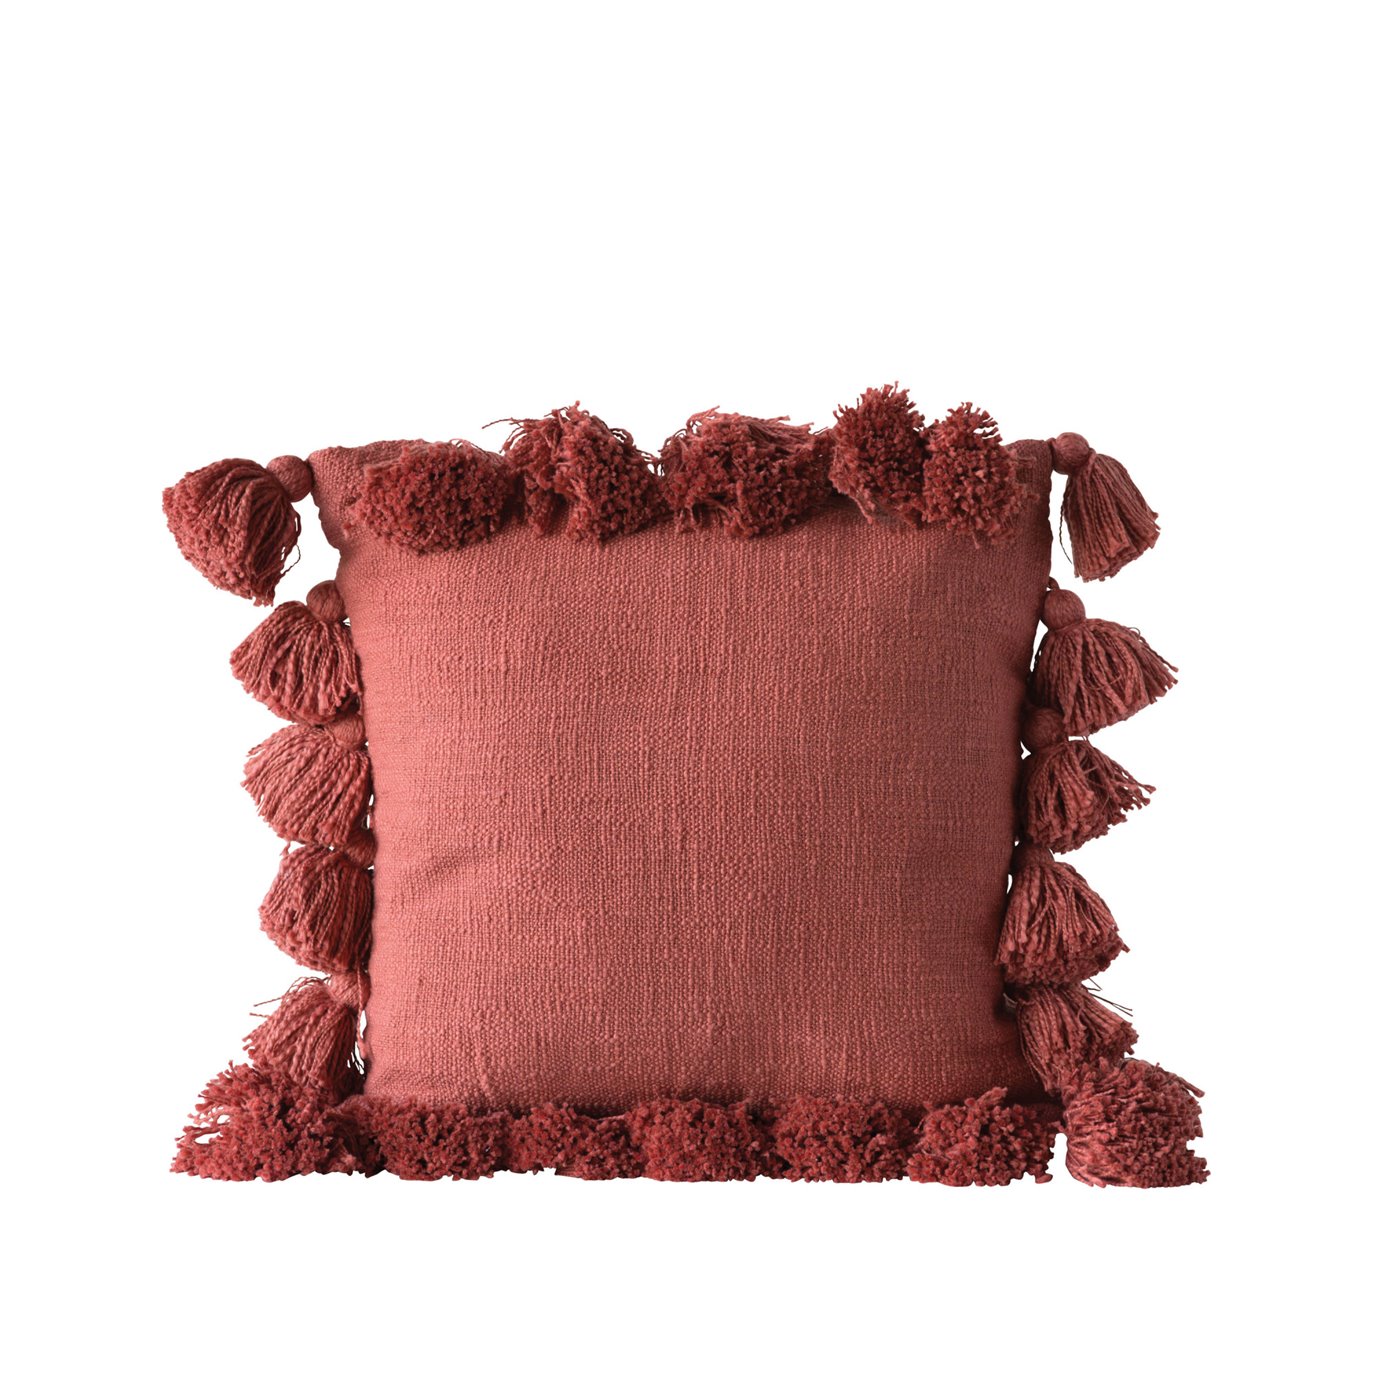 Square Cotton Woven Pillow with Tassels, Russet